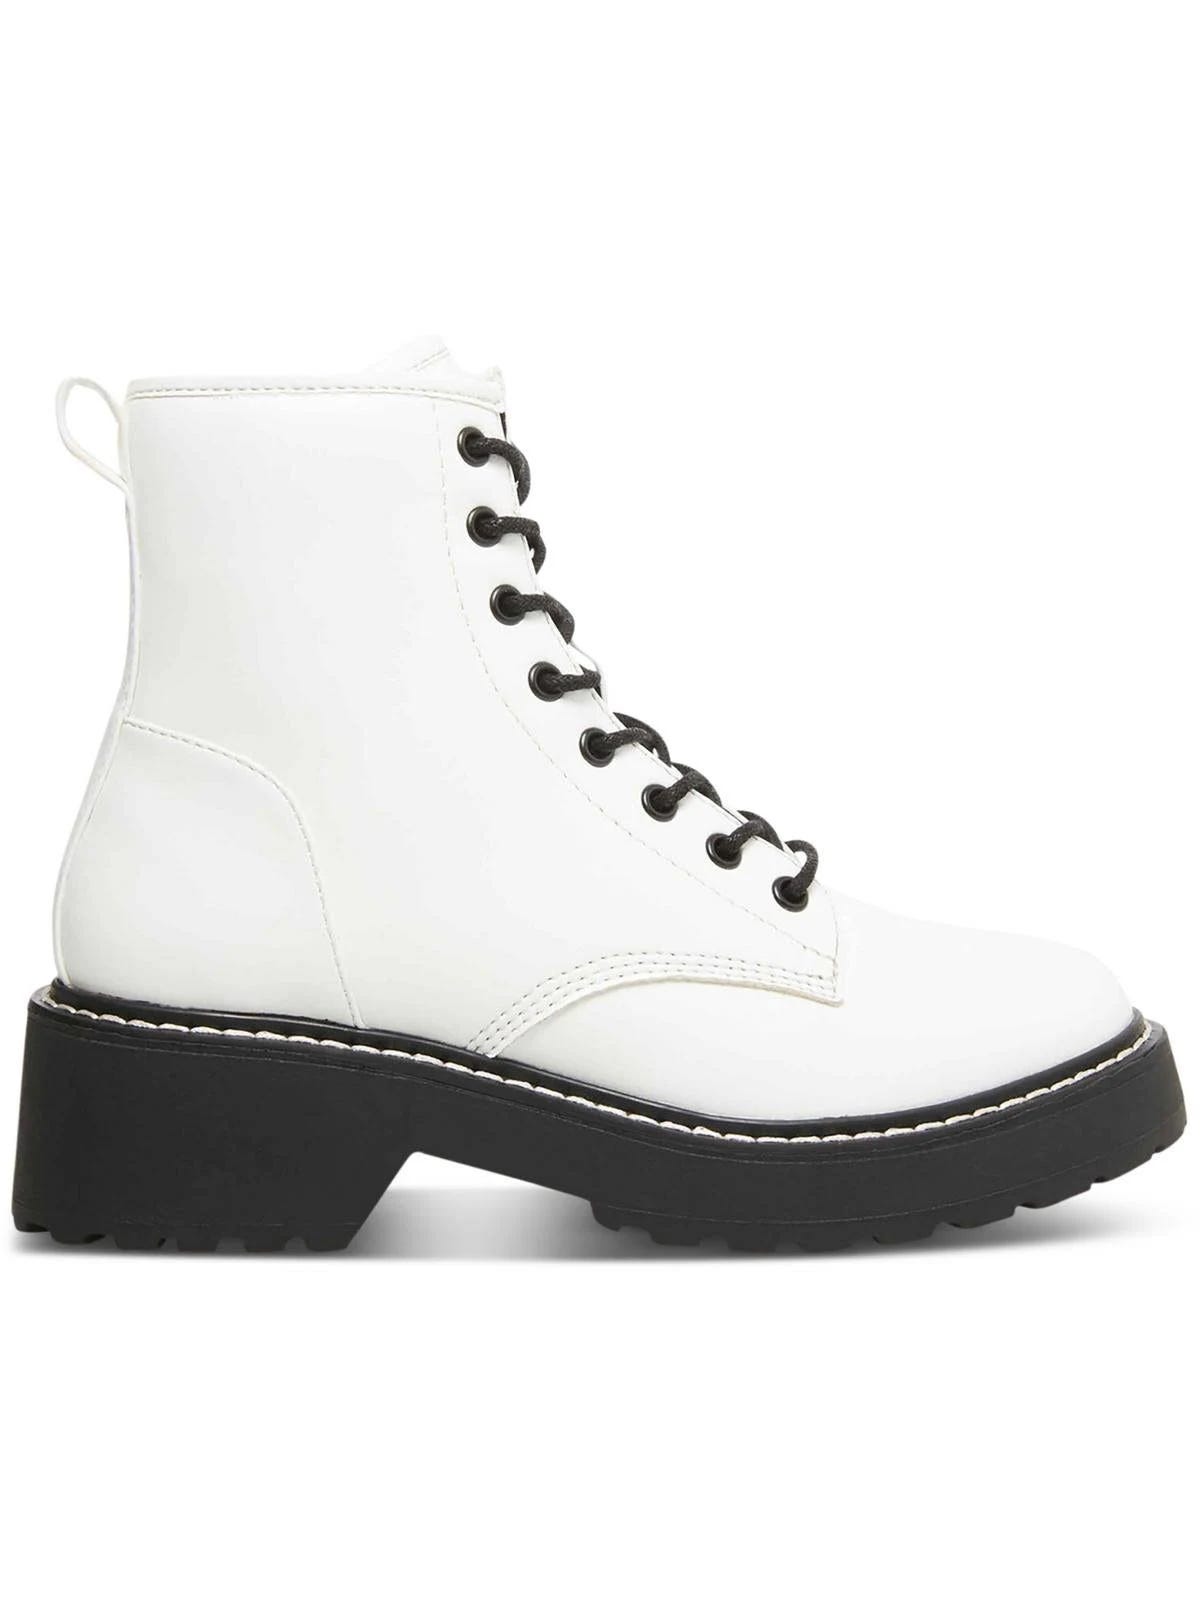 Stylish White Combat Booties for Women | Image